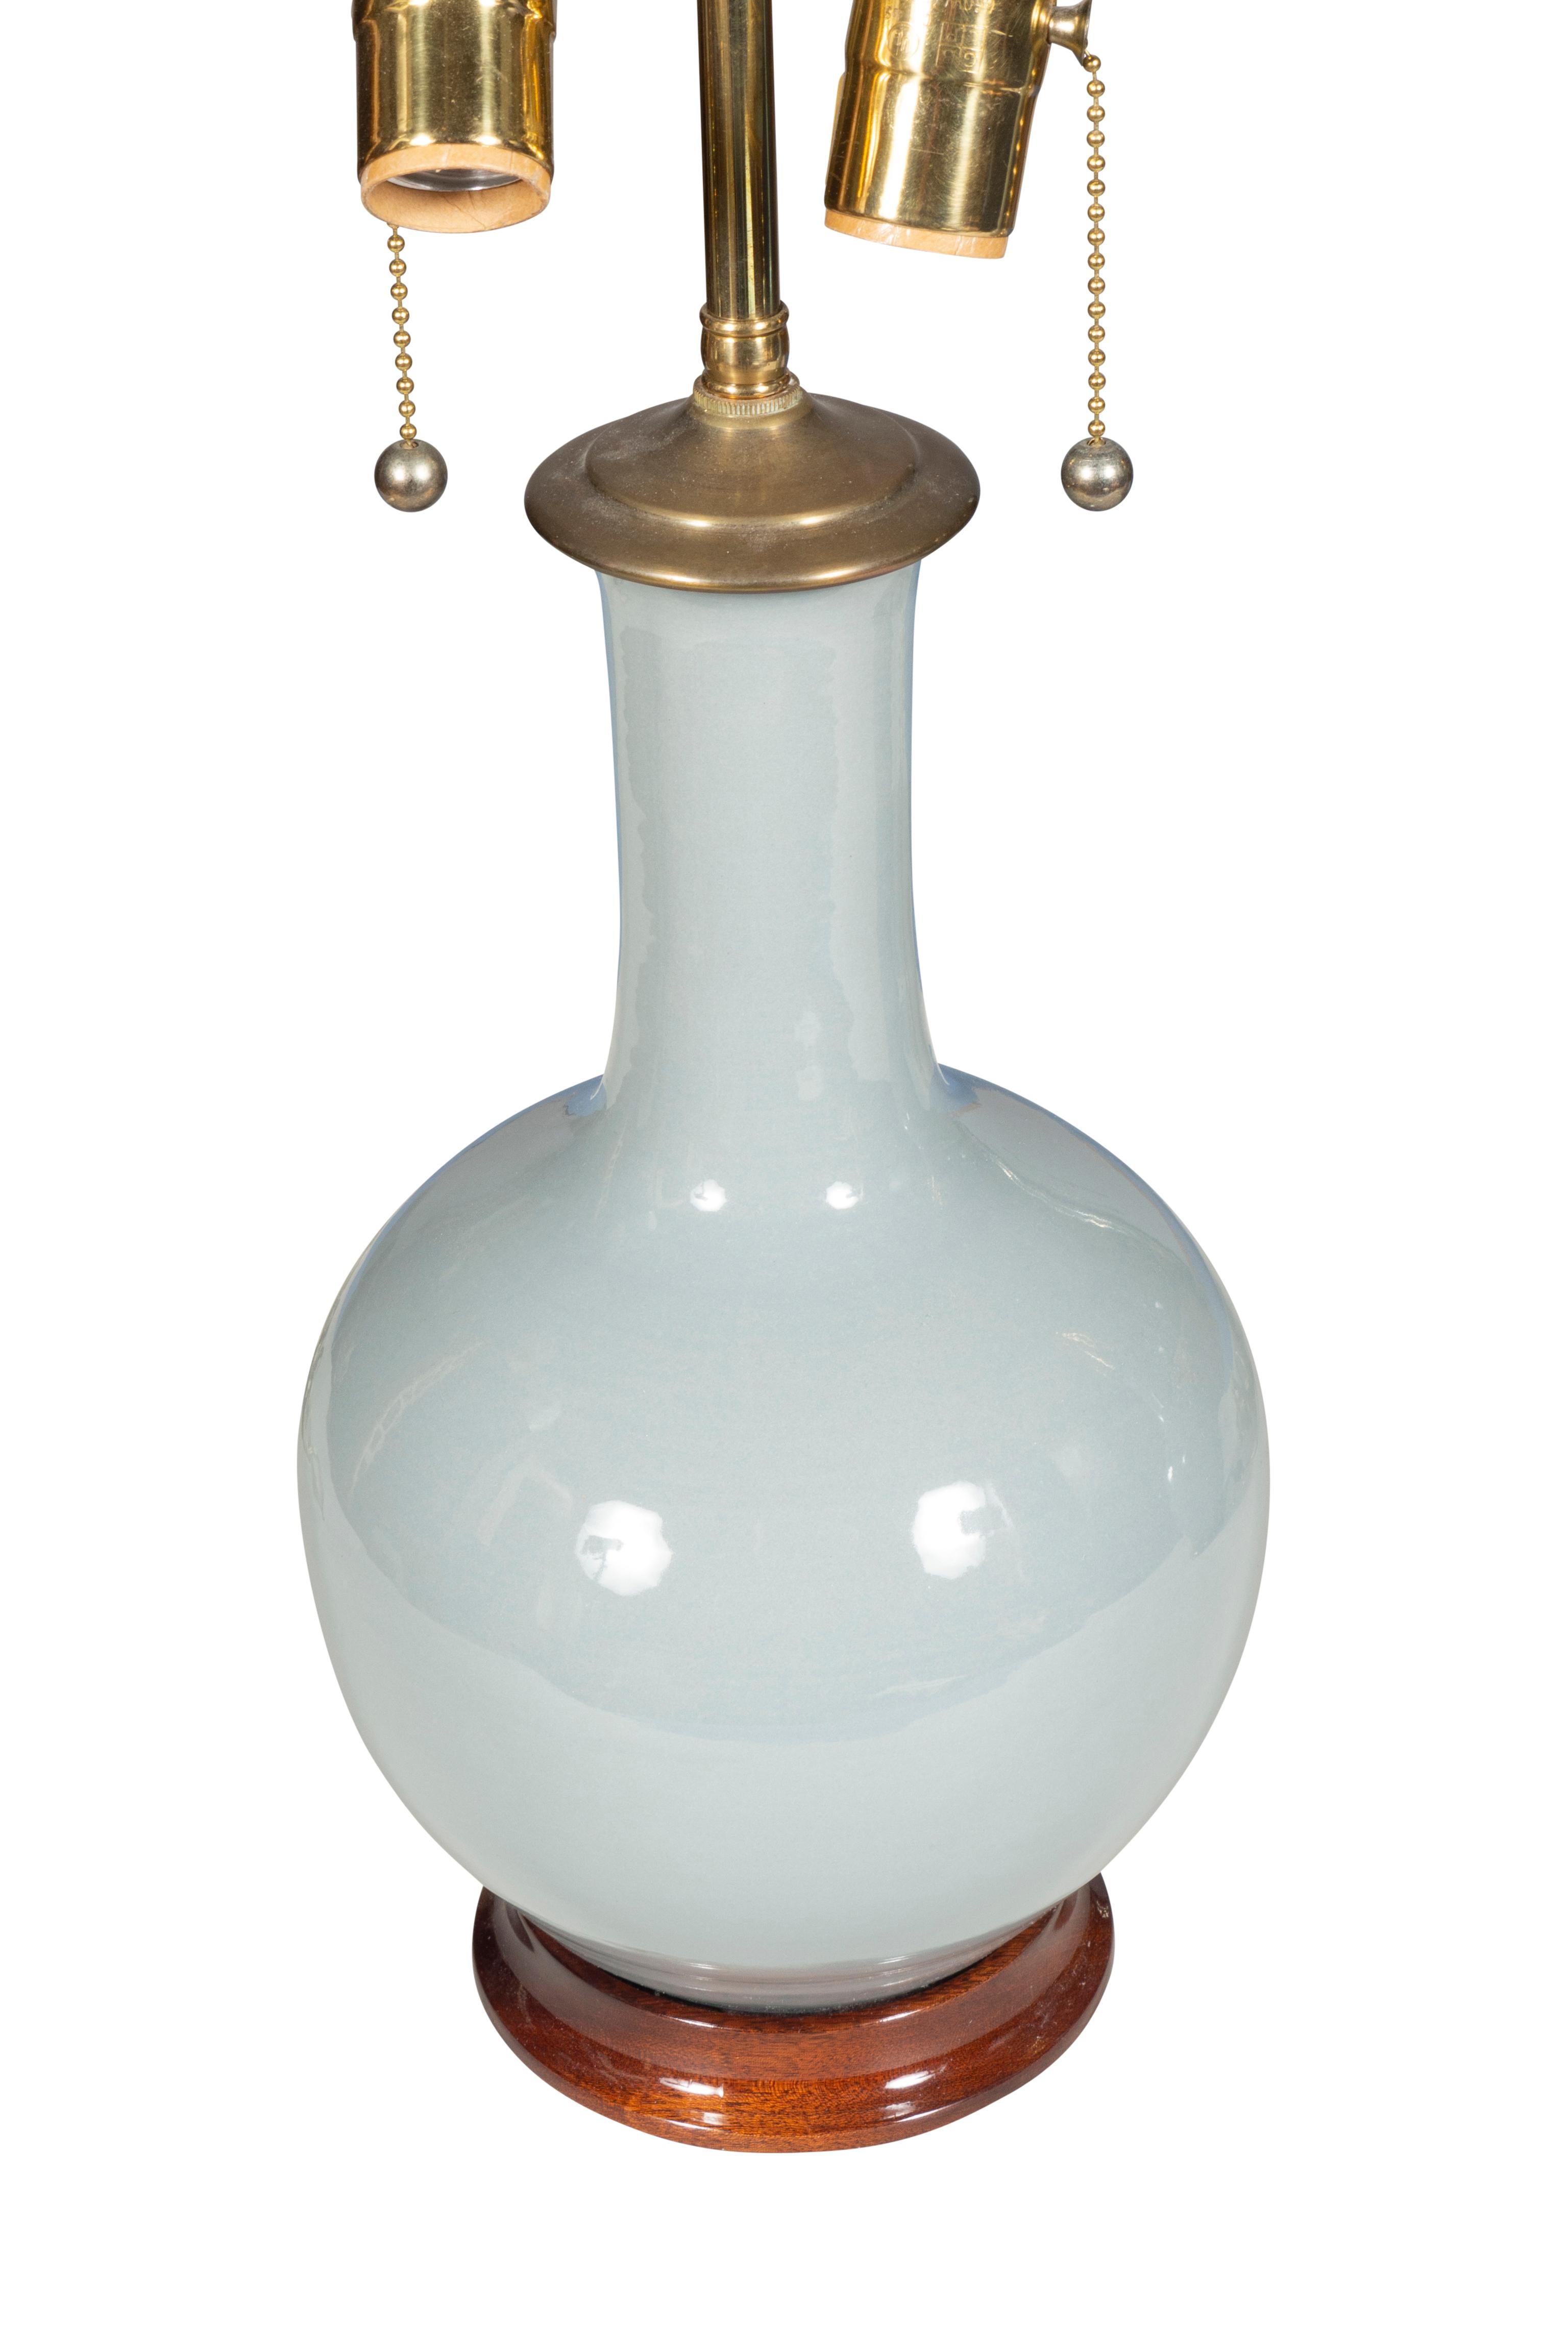 Pair of Christopher Spitzmiller Ceramic Table Lamps In Good Condition For Sale In Essex, MA